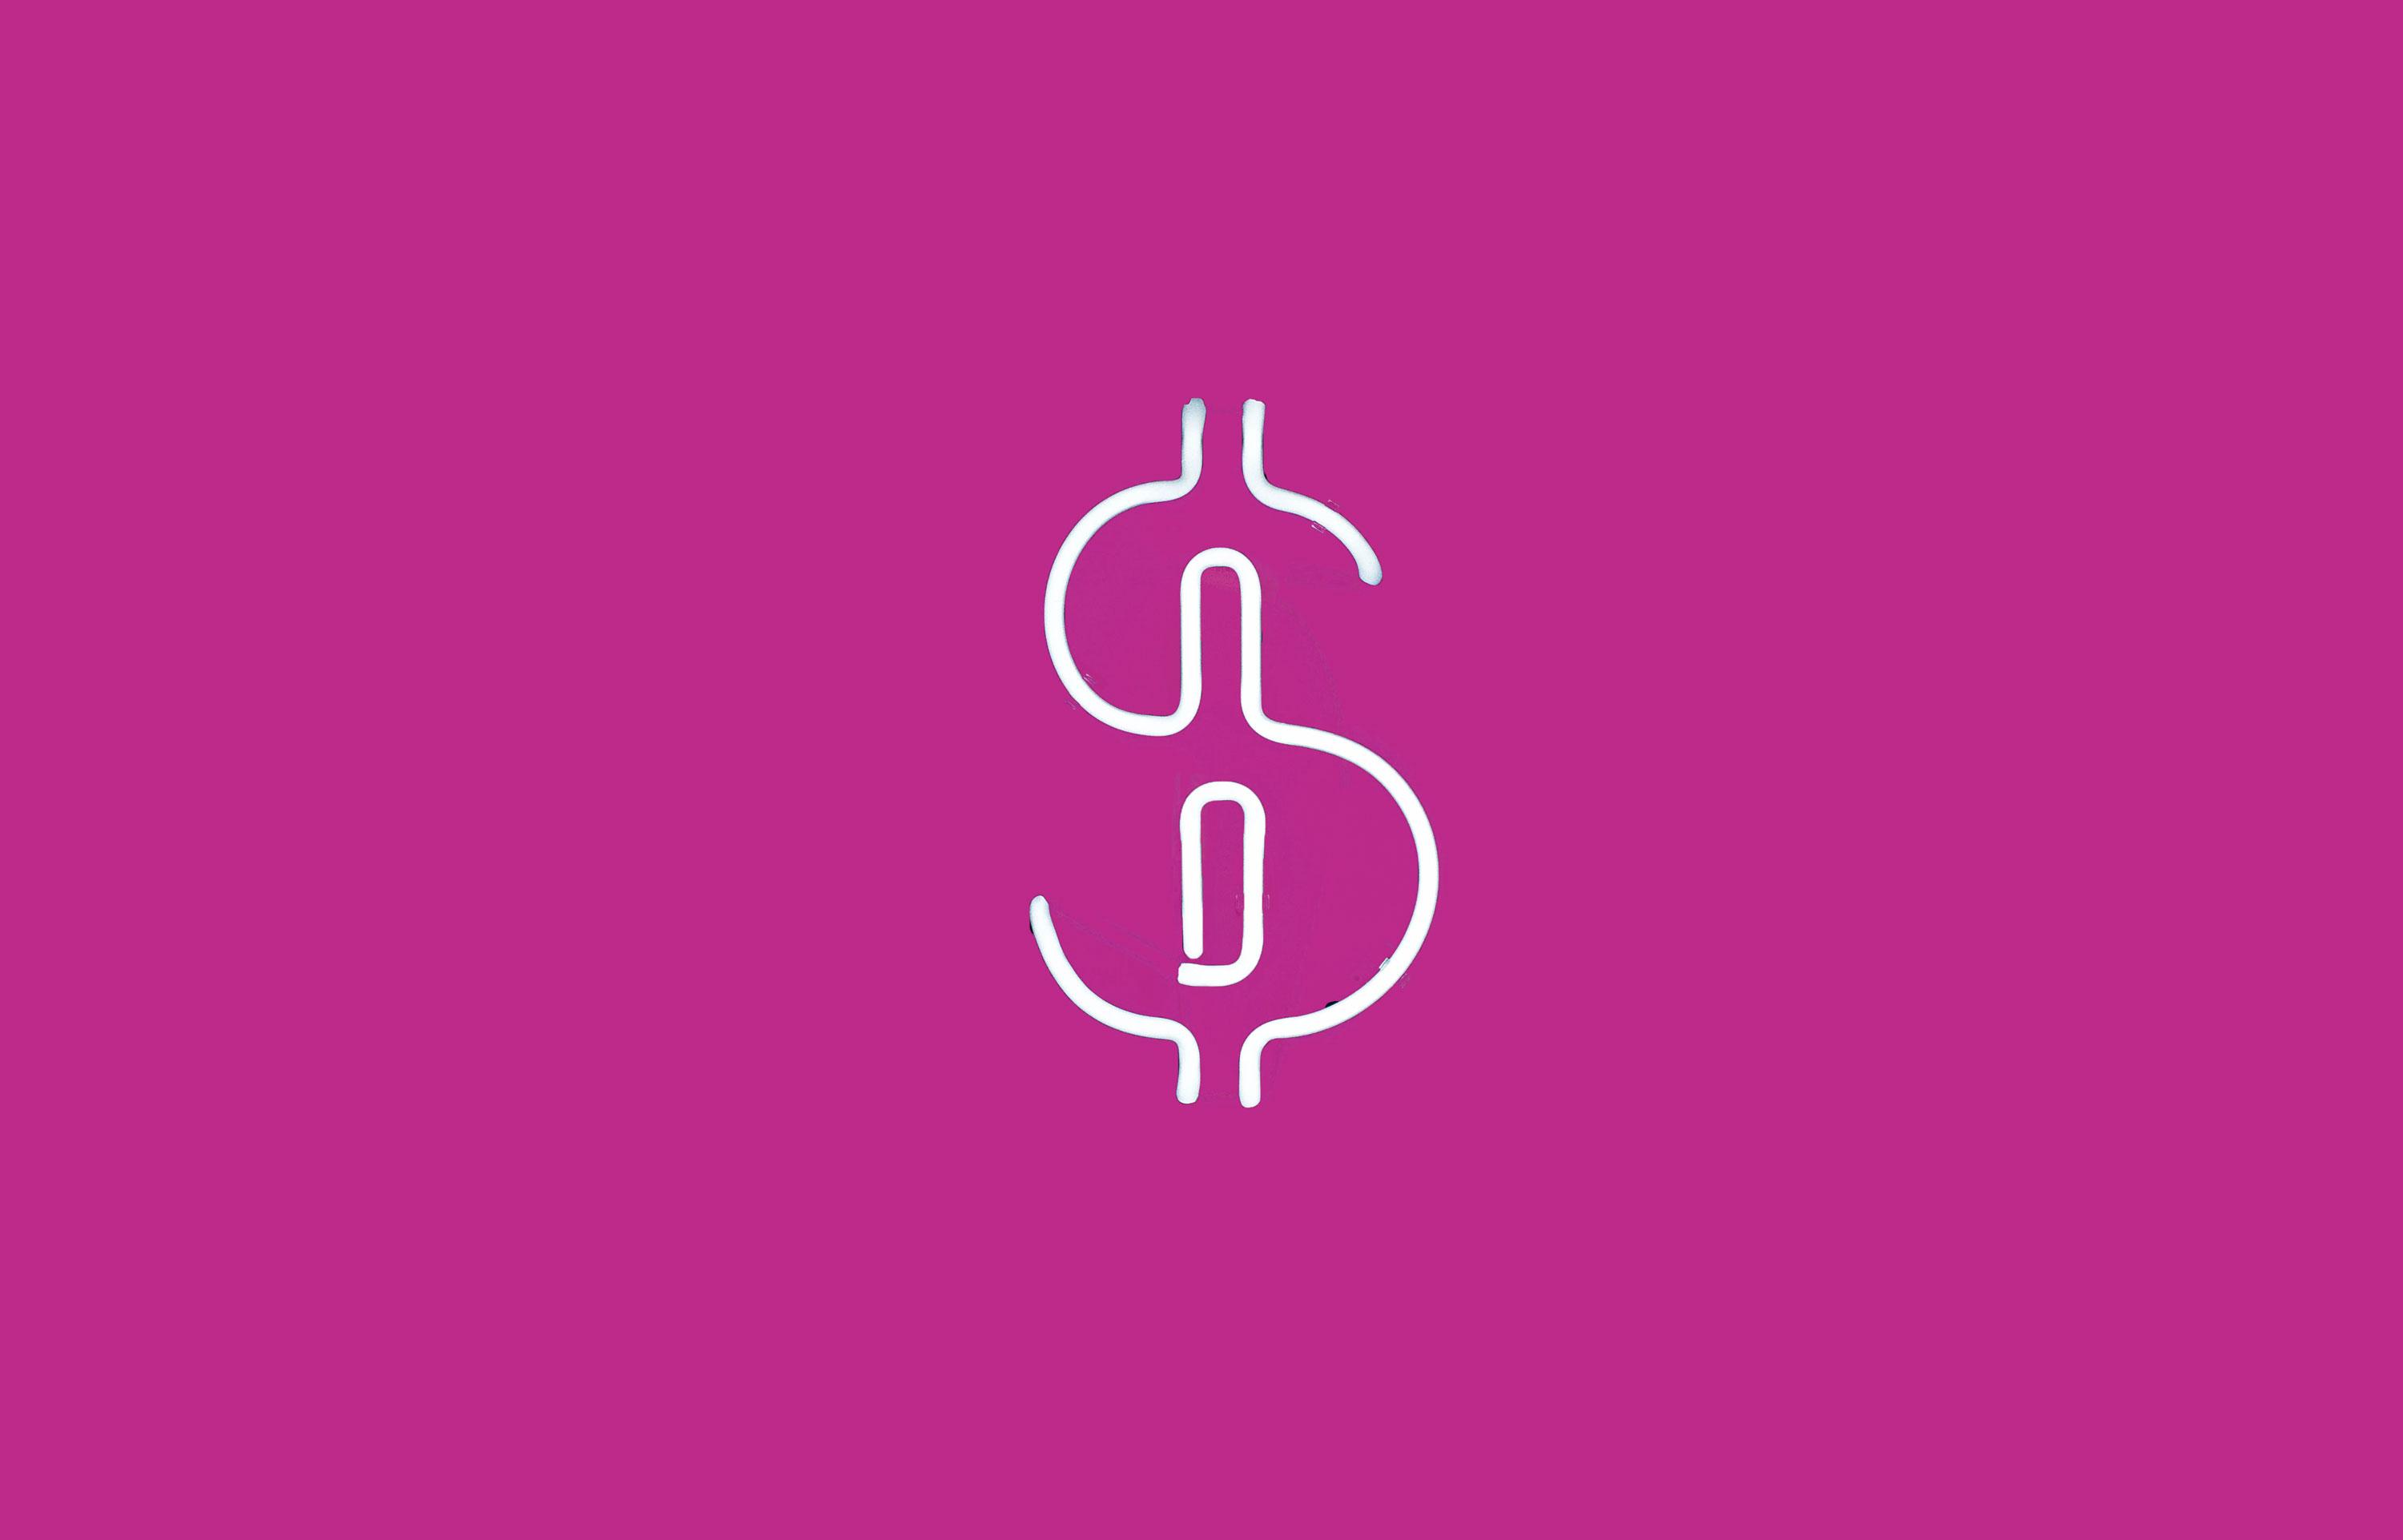 Dollar sign with pink background